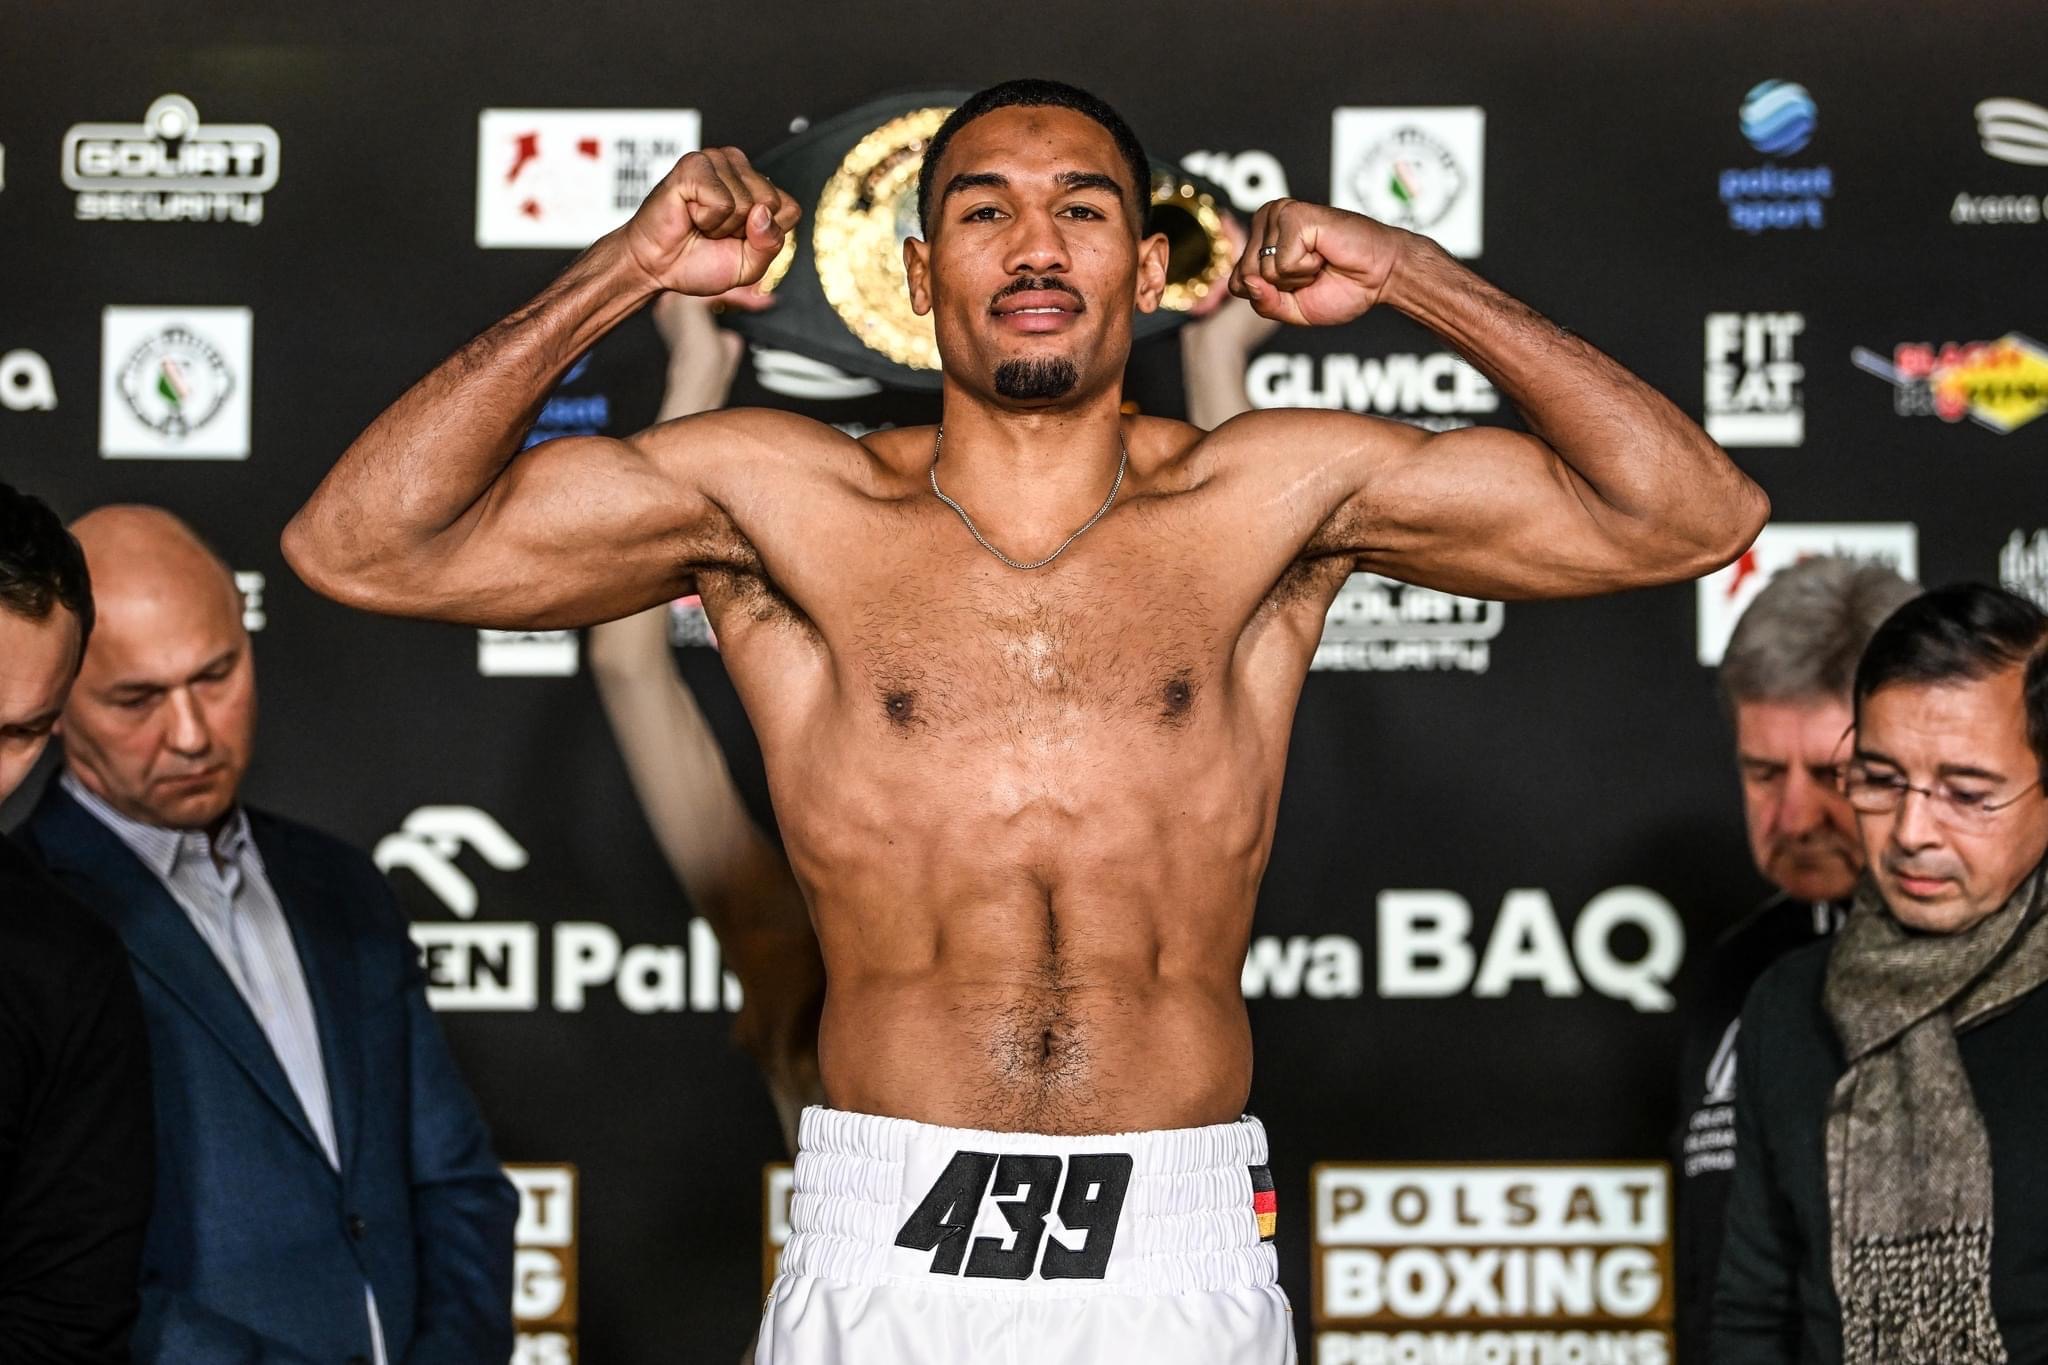 Unbeaten prospect Osleys Iglesias joins Eye of the Tiger’s super middleweight standouts